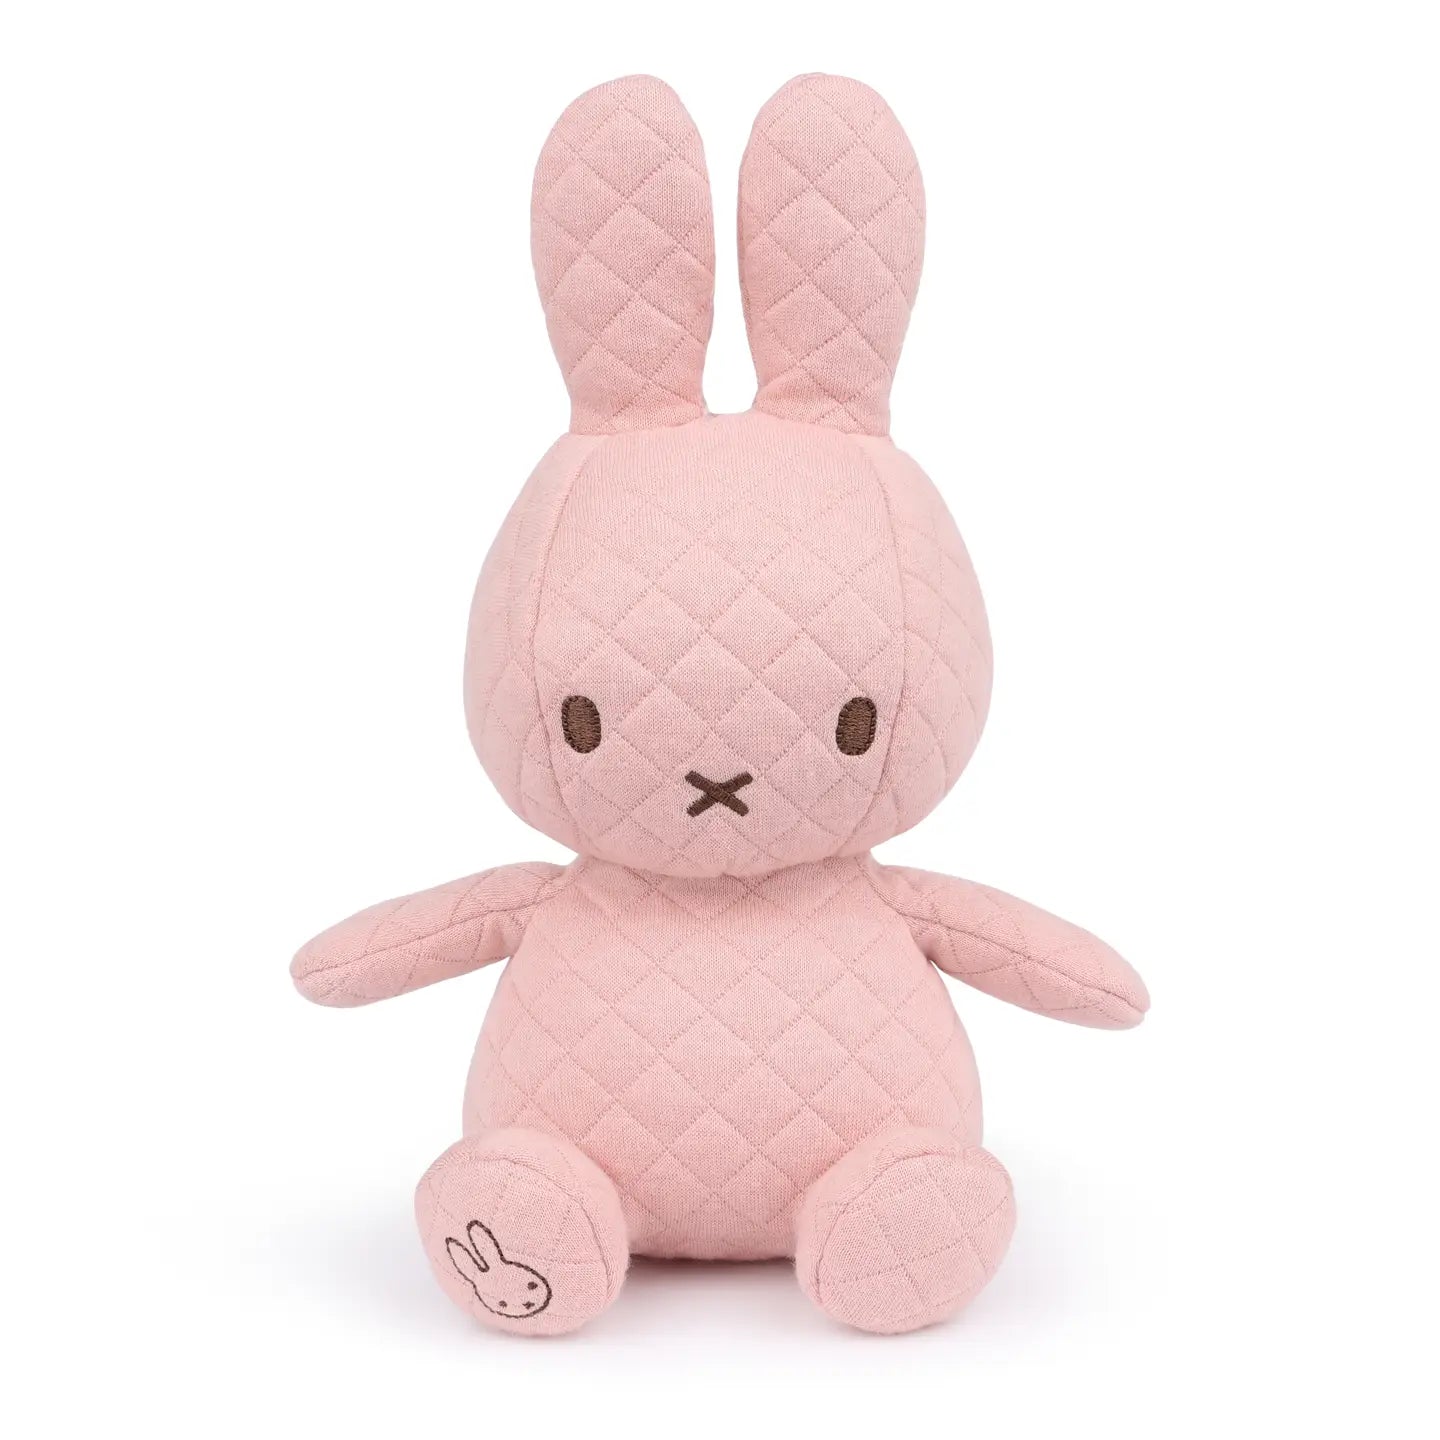 Miffy Quilted Bonbon Pink in Giftbox 23cm